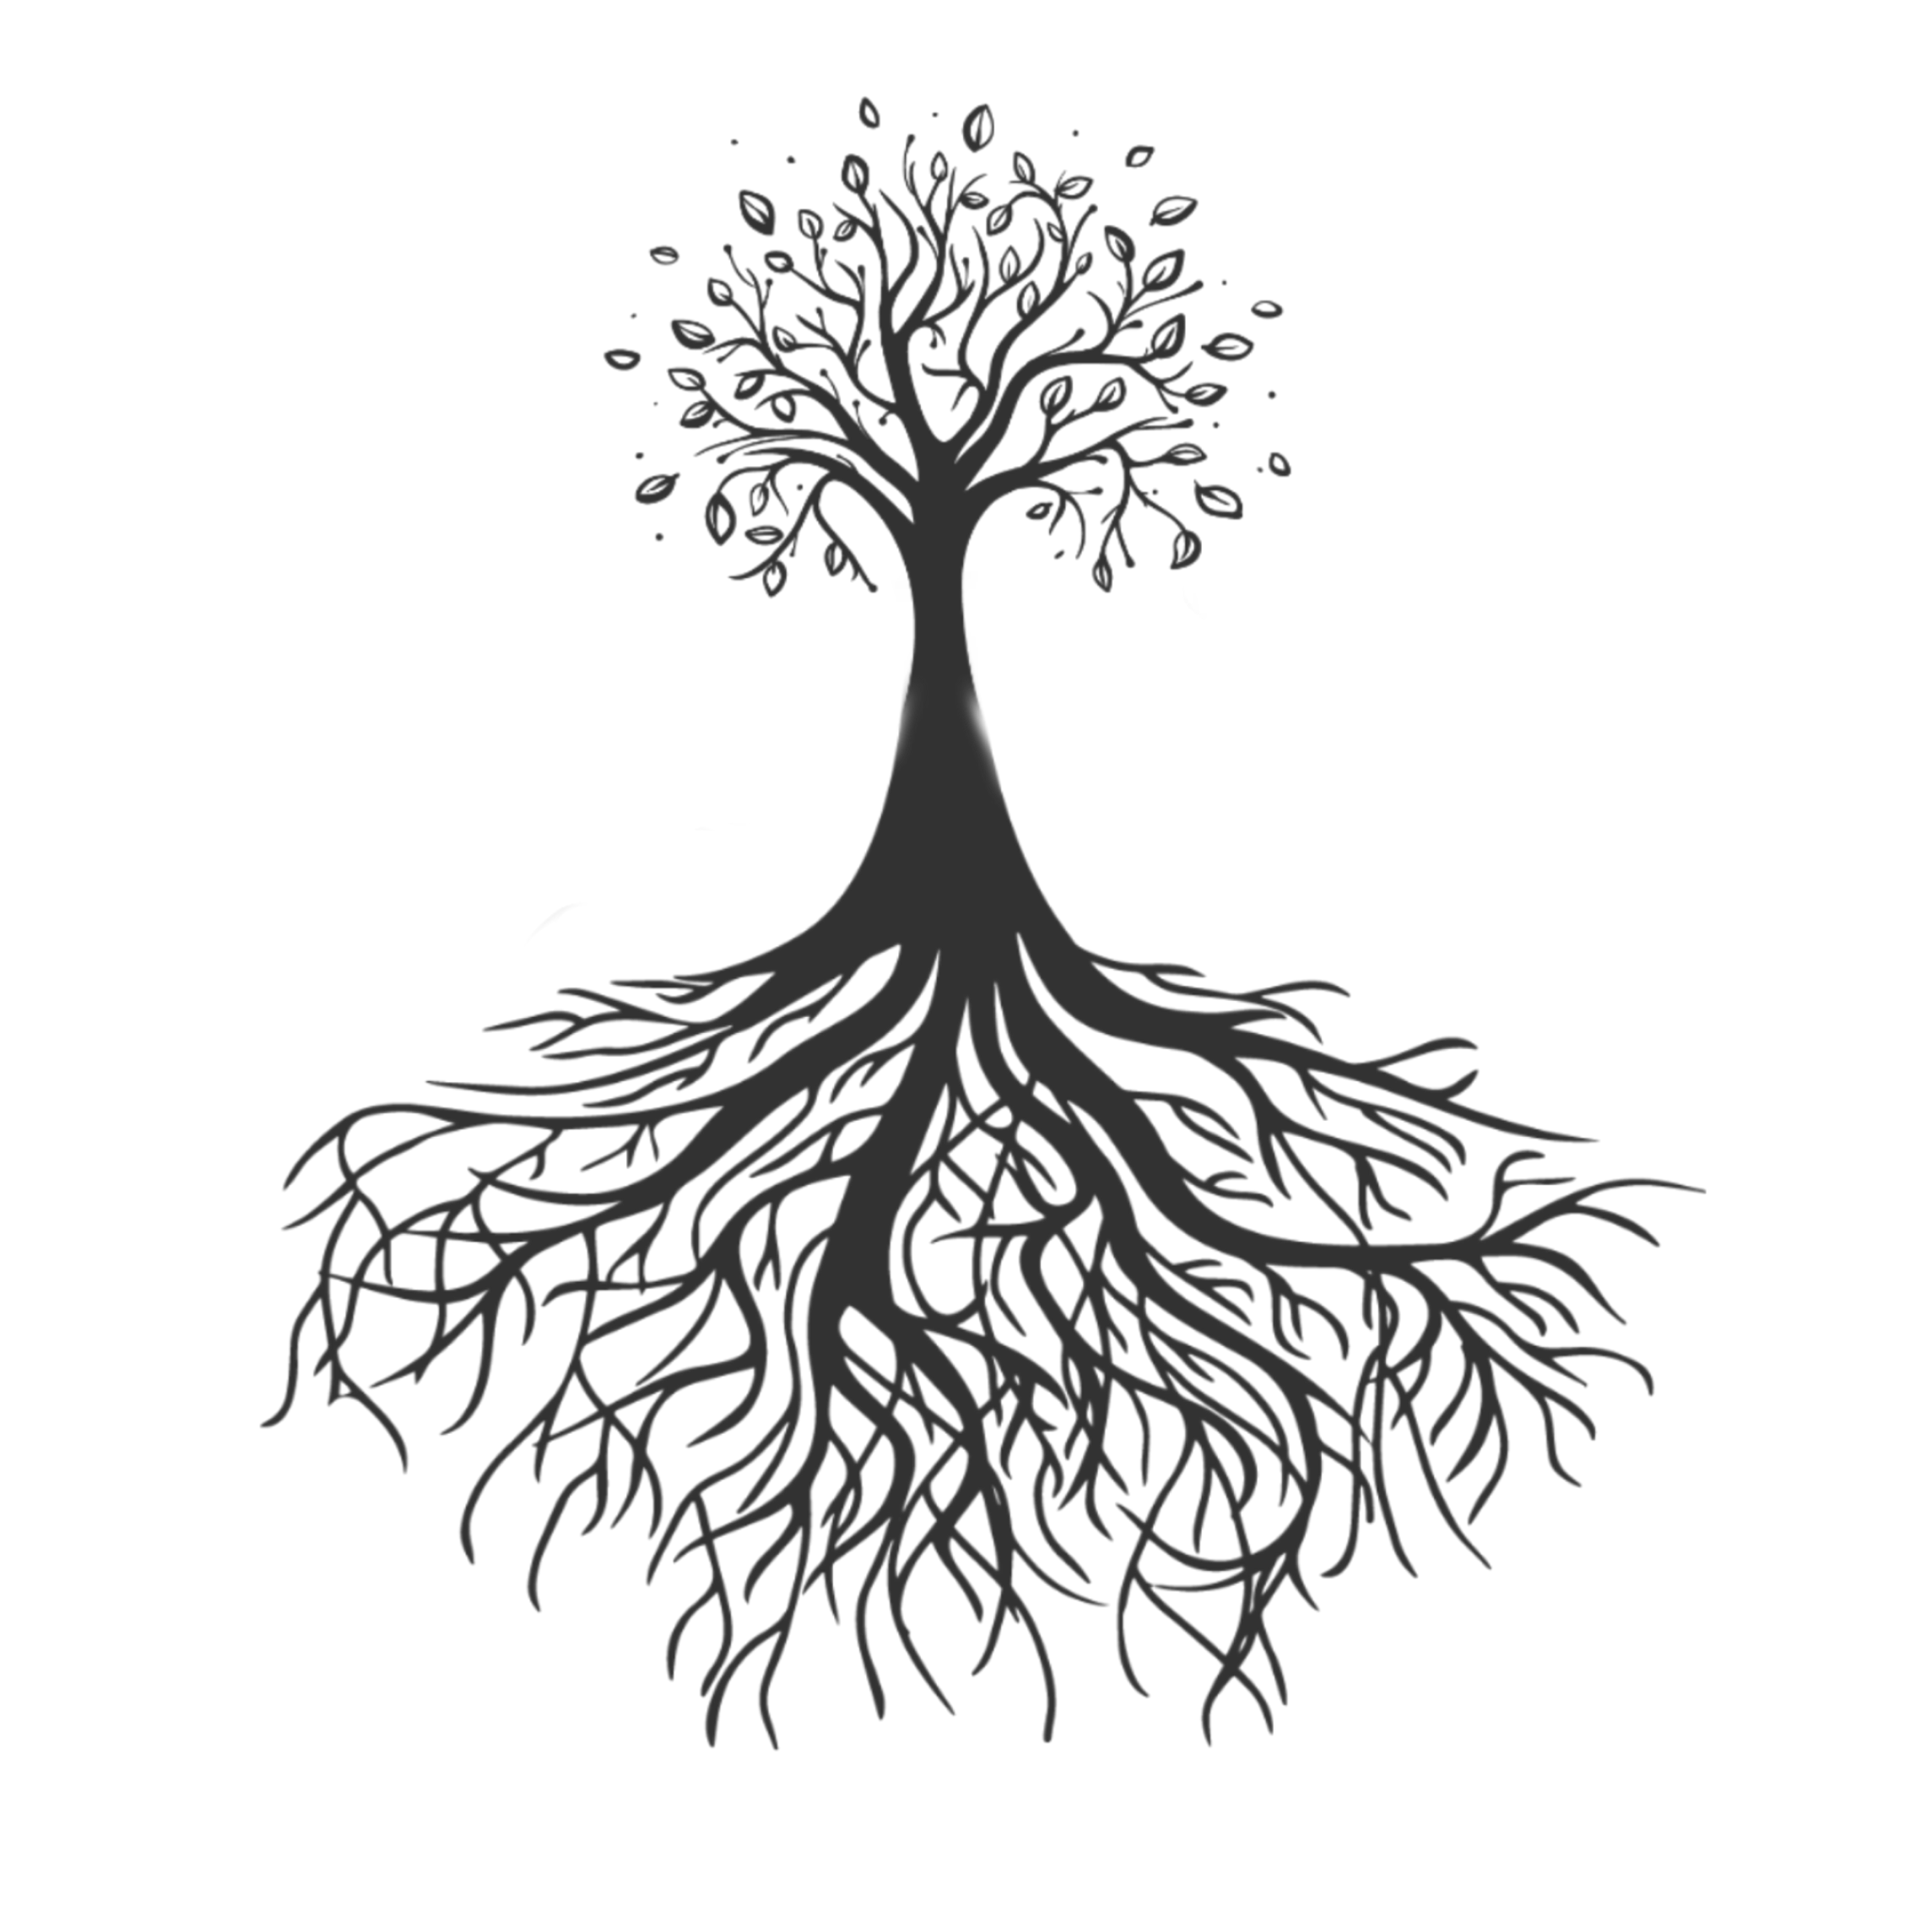 This visual is about treeoflife roots freetoedit #treeoflife #roots.